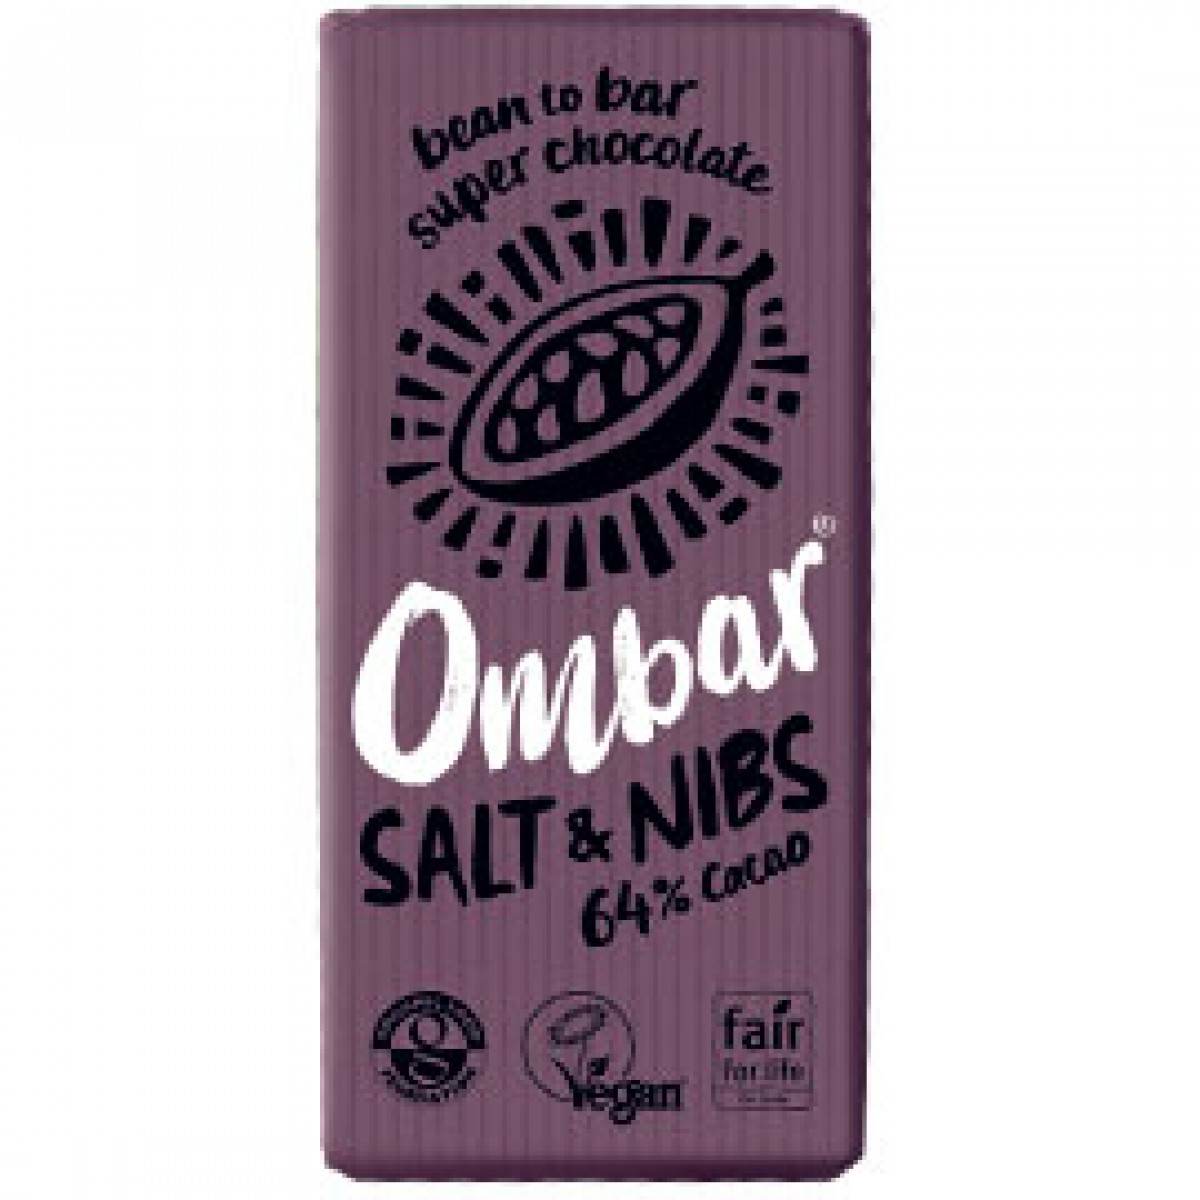 Product picture for Salt and Nibs Bars